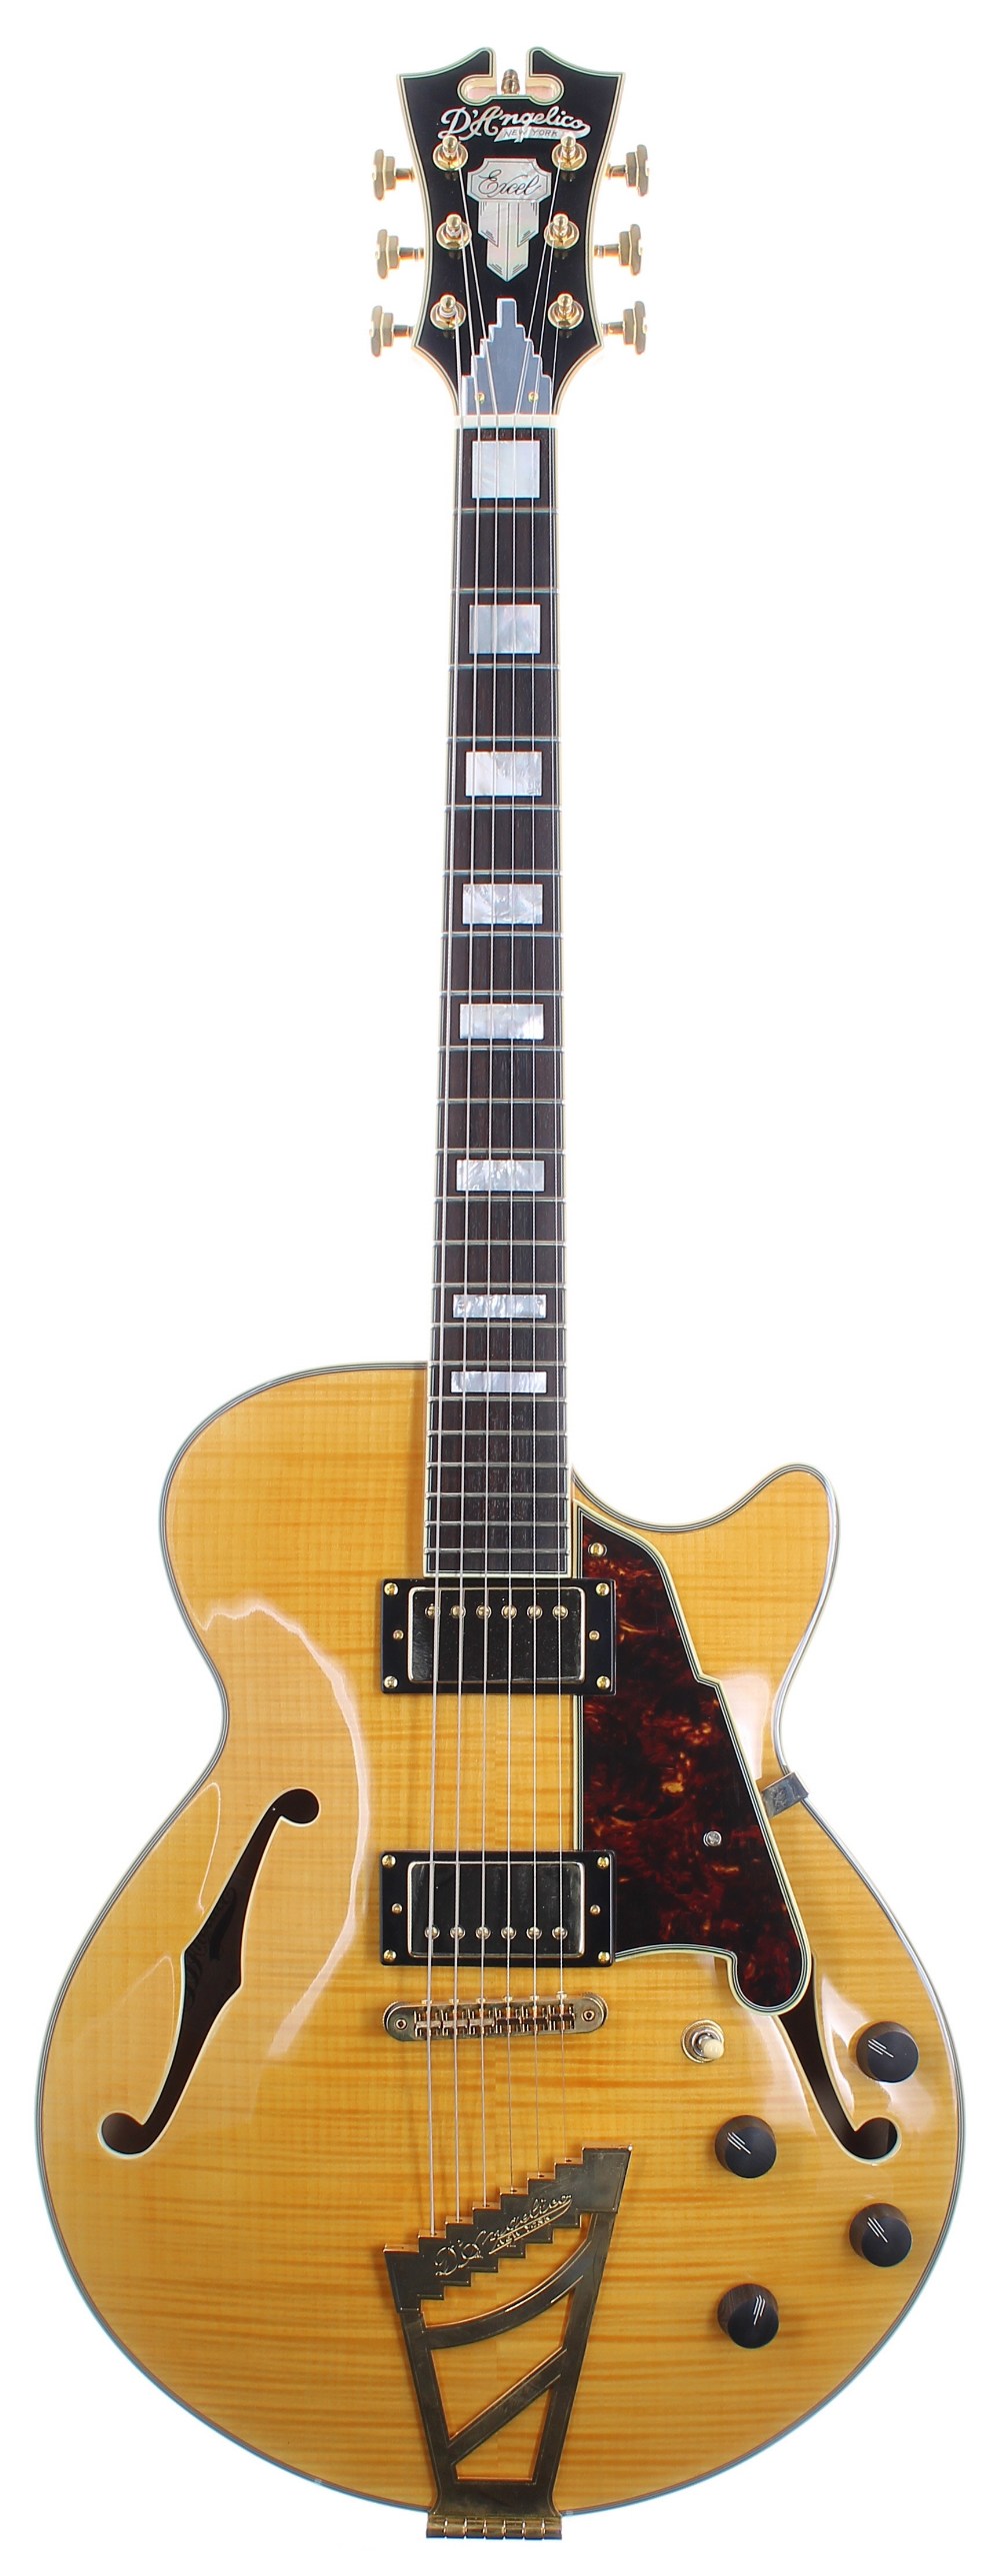 2014 D'Angelico Excel EX-SS hollow body electric guitar, made in Korea, ser. no. US14xxxx61; Finish: